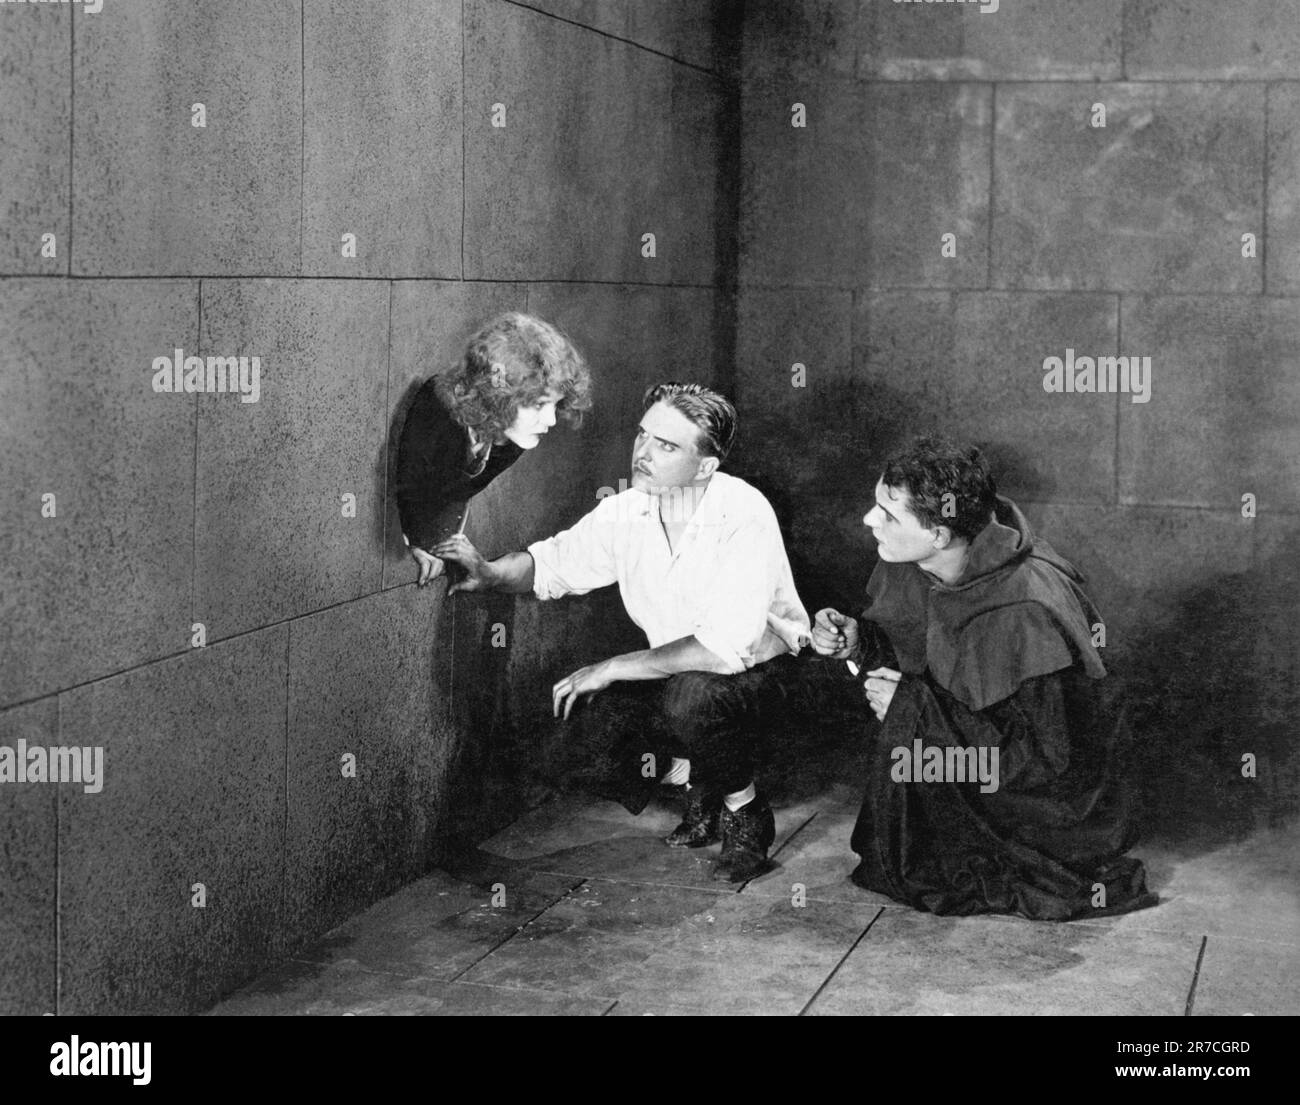 Hollywood, California:  c. 1918 A scene in an early silent movie still where two men in a room converse with a woman sticking her head out of a hole in the wall. Stock Photo